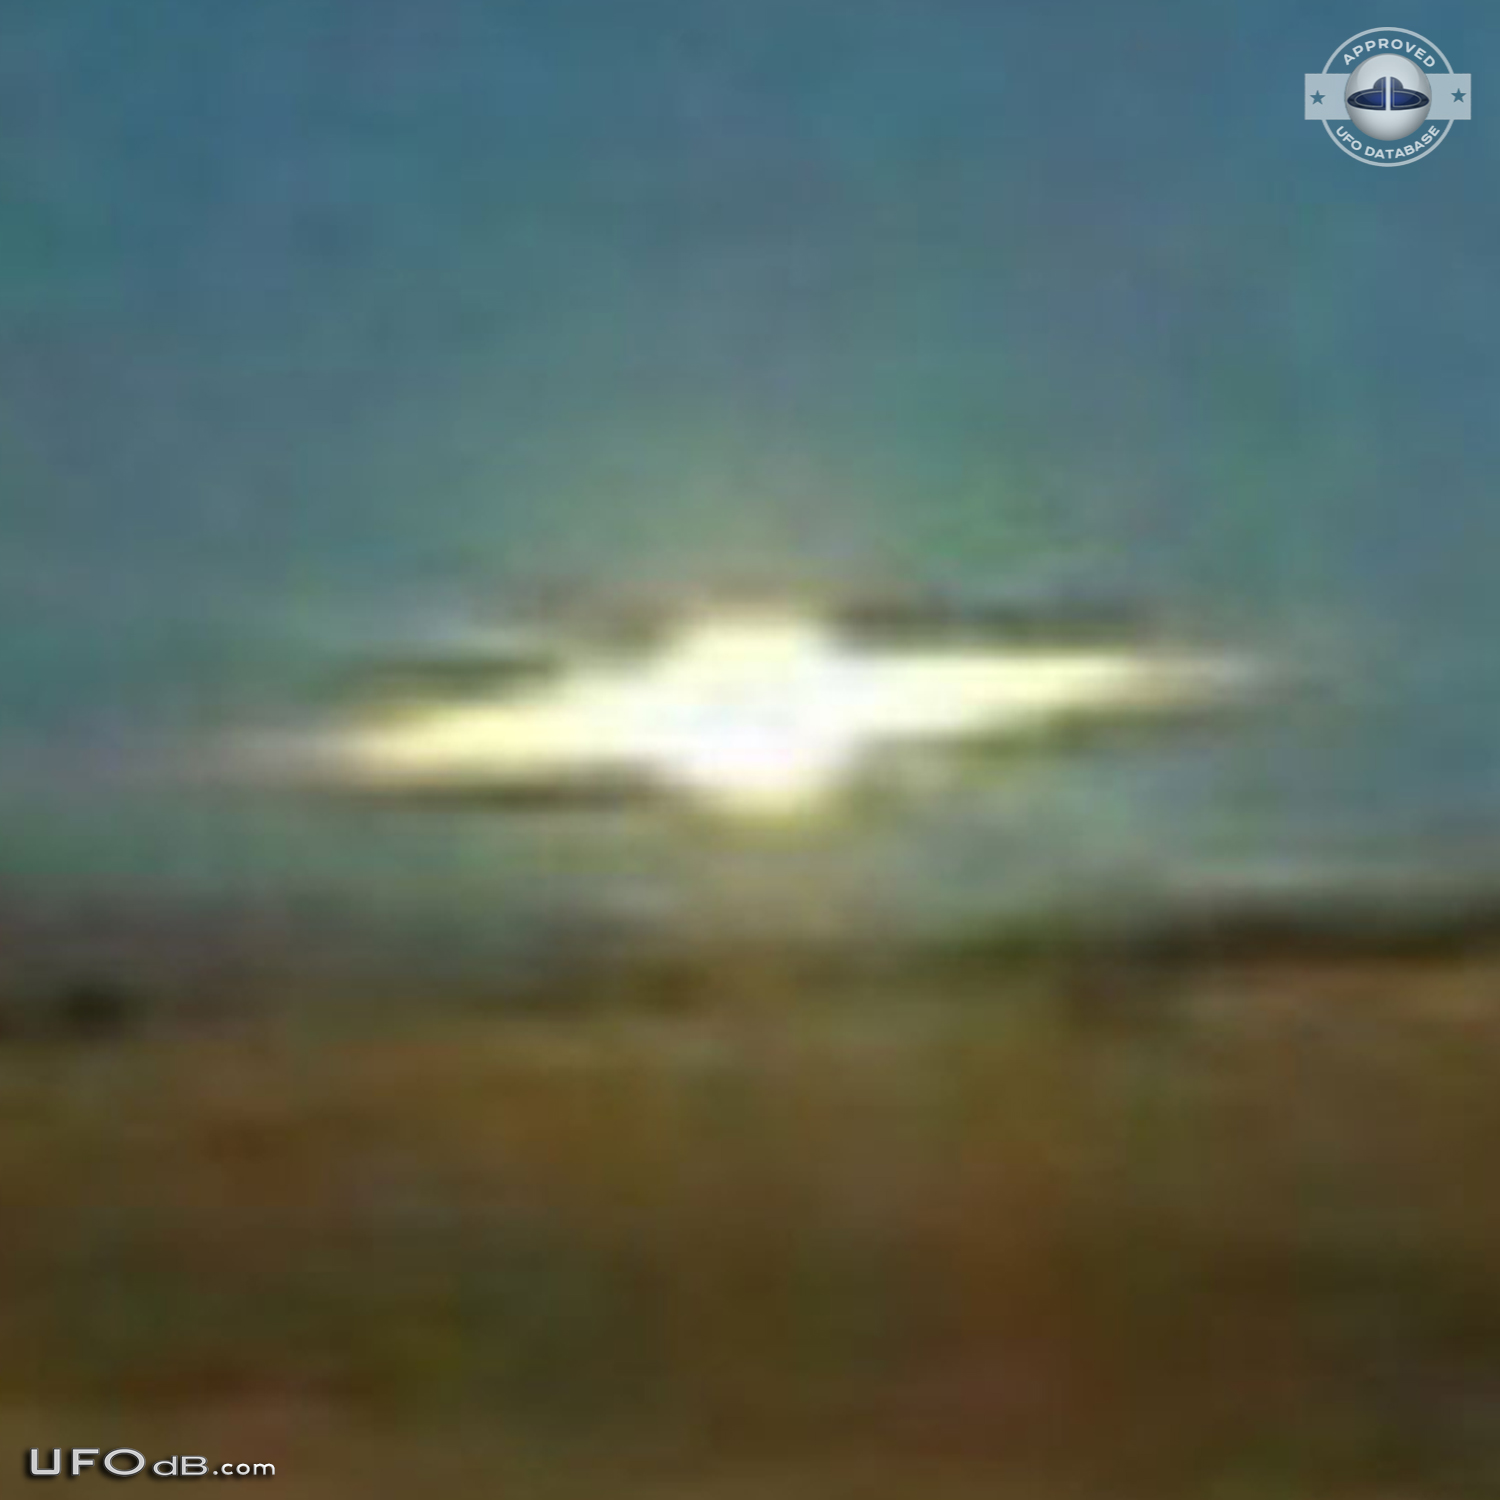 1973 UFO picture coming from South Pacific New Caledonia island UFO Picture #426-4